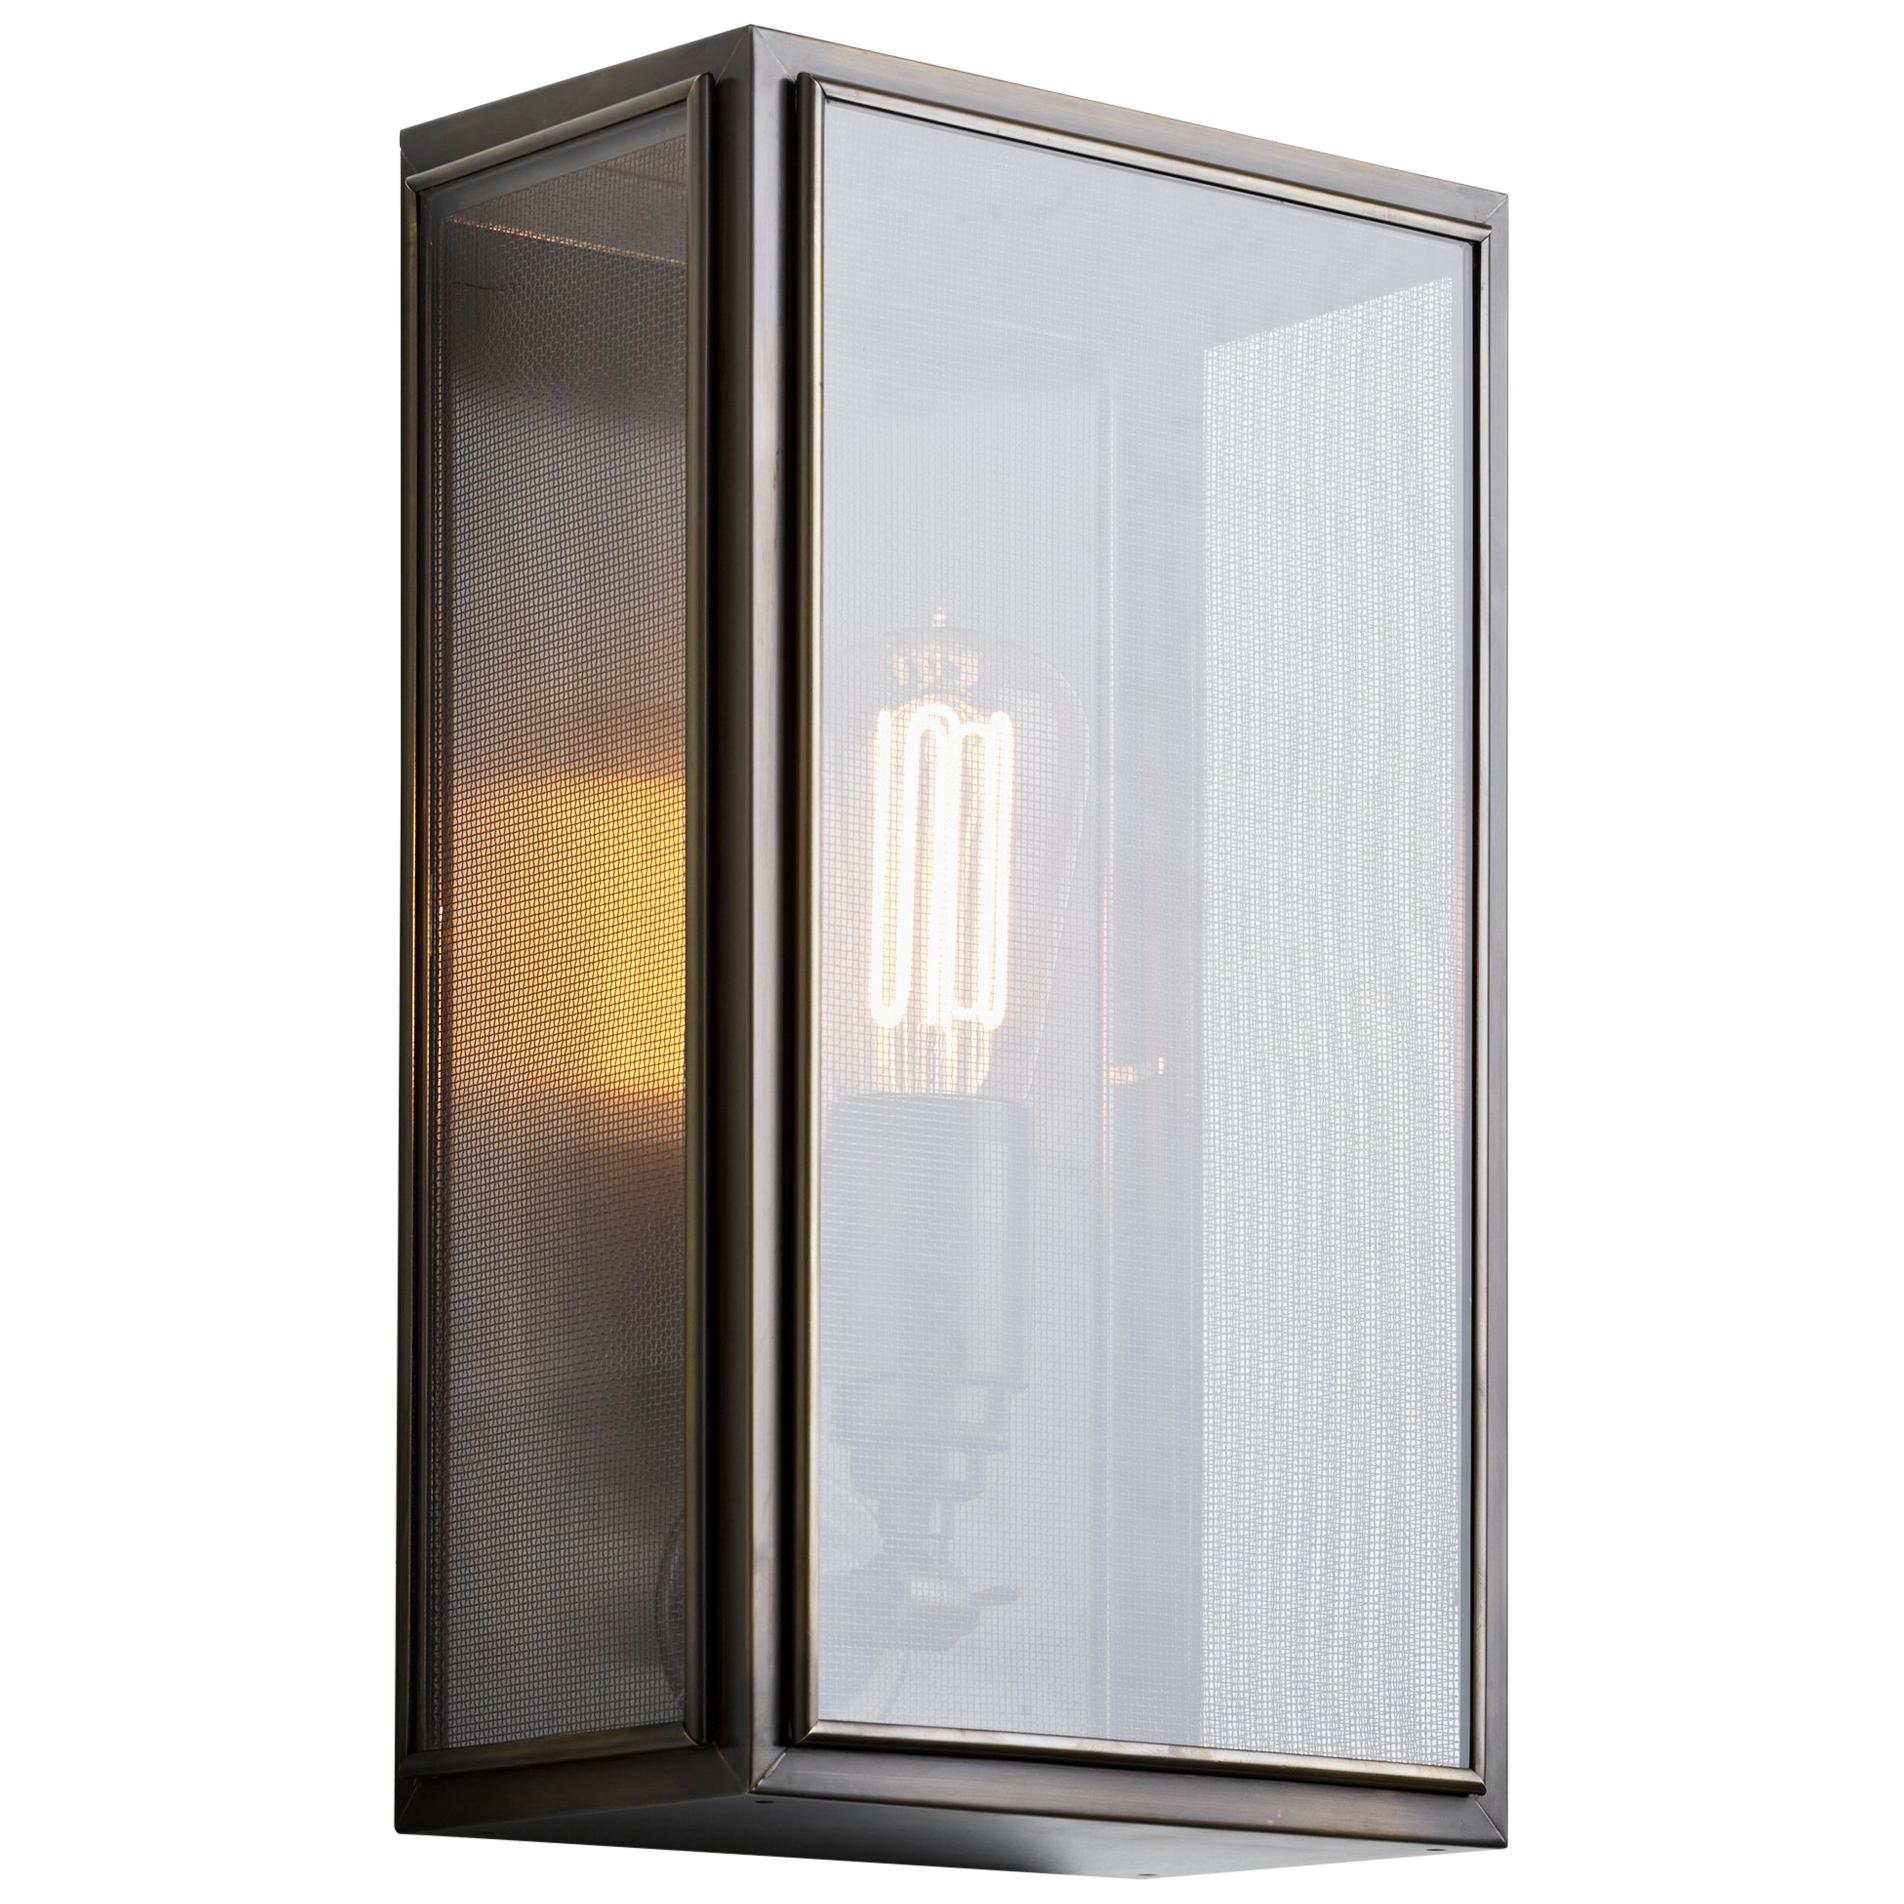 Tekna Essex Gauze-C Wall Light with Dark Bronze Finish and Clear Glass